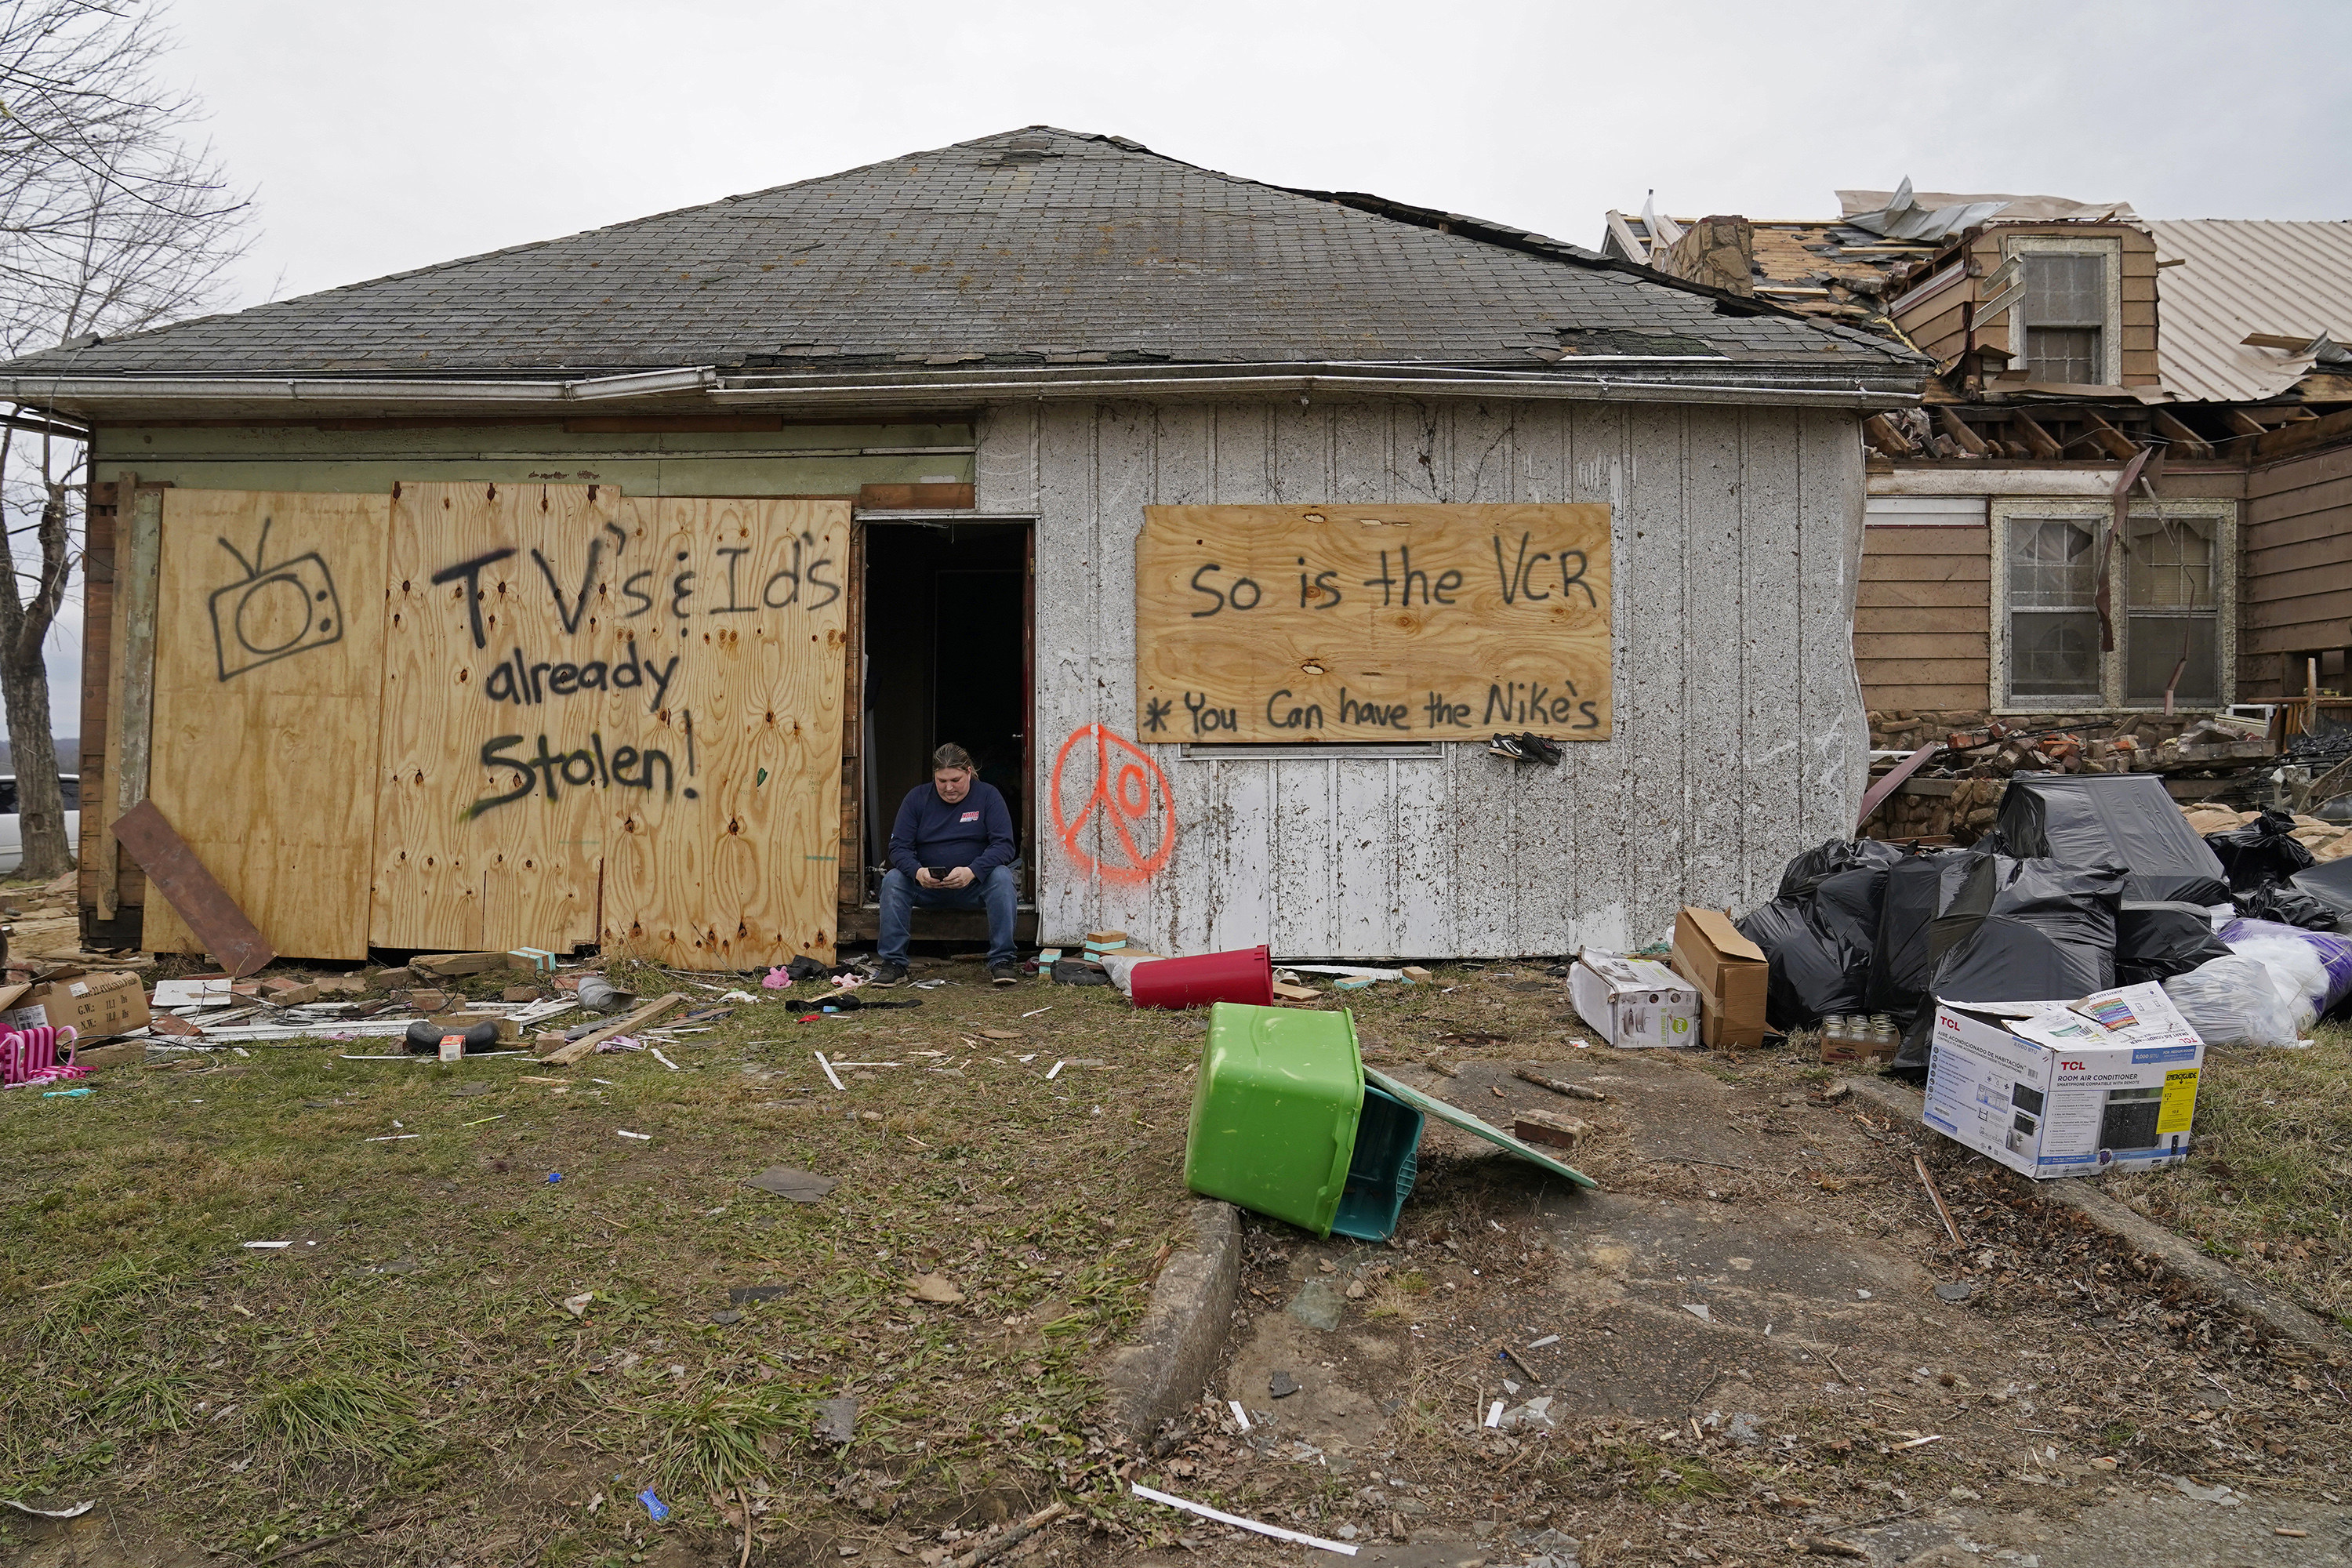 A man sits in the doorway of a destroyed home with signs that read tvs and ids already stolen so is the vcr you can have the nikes